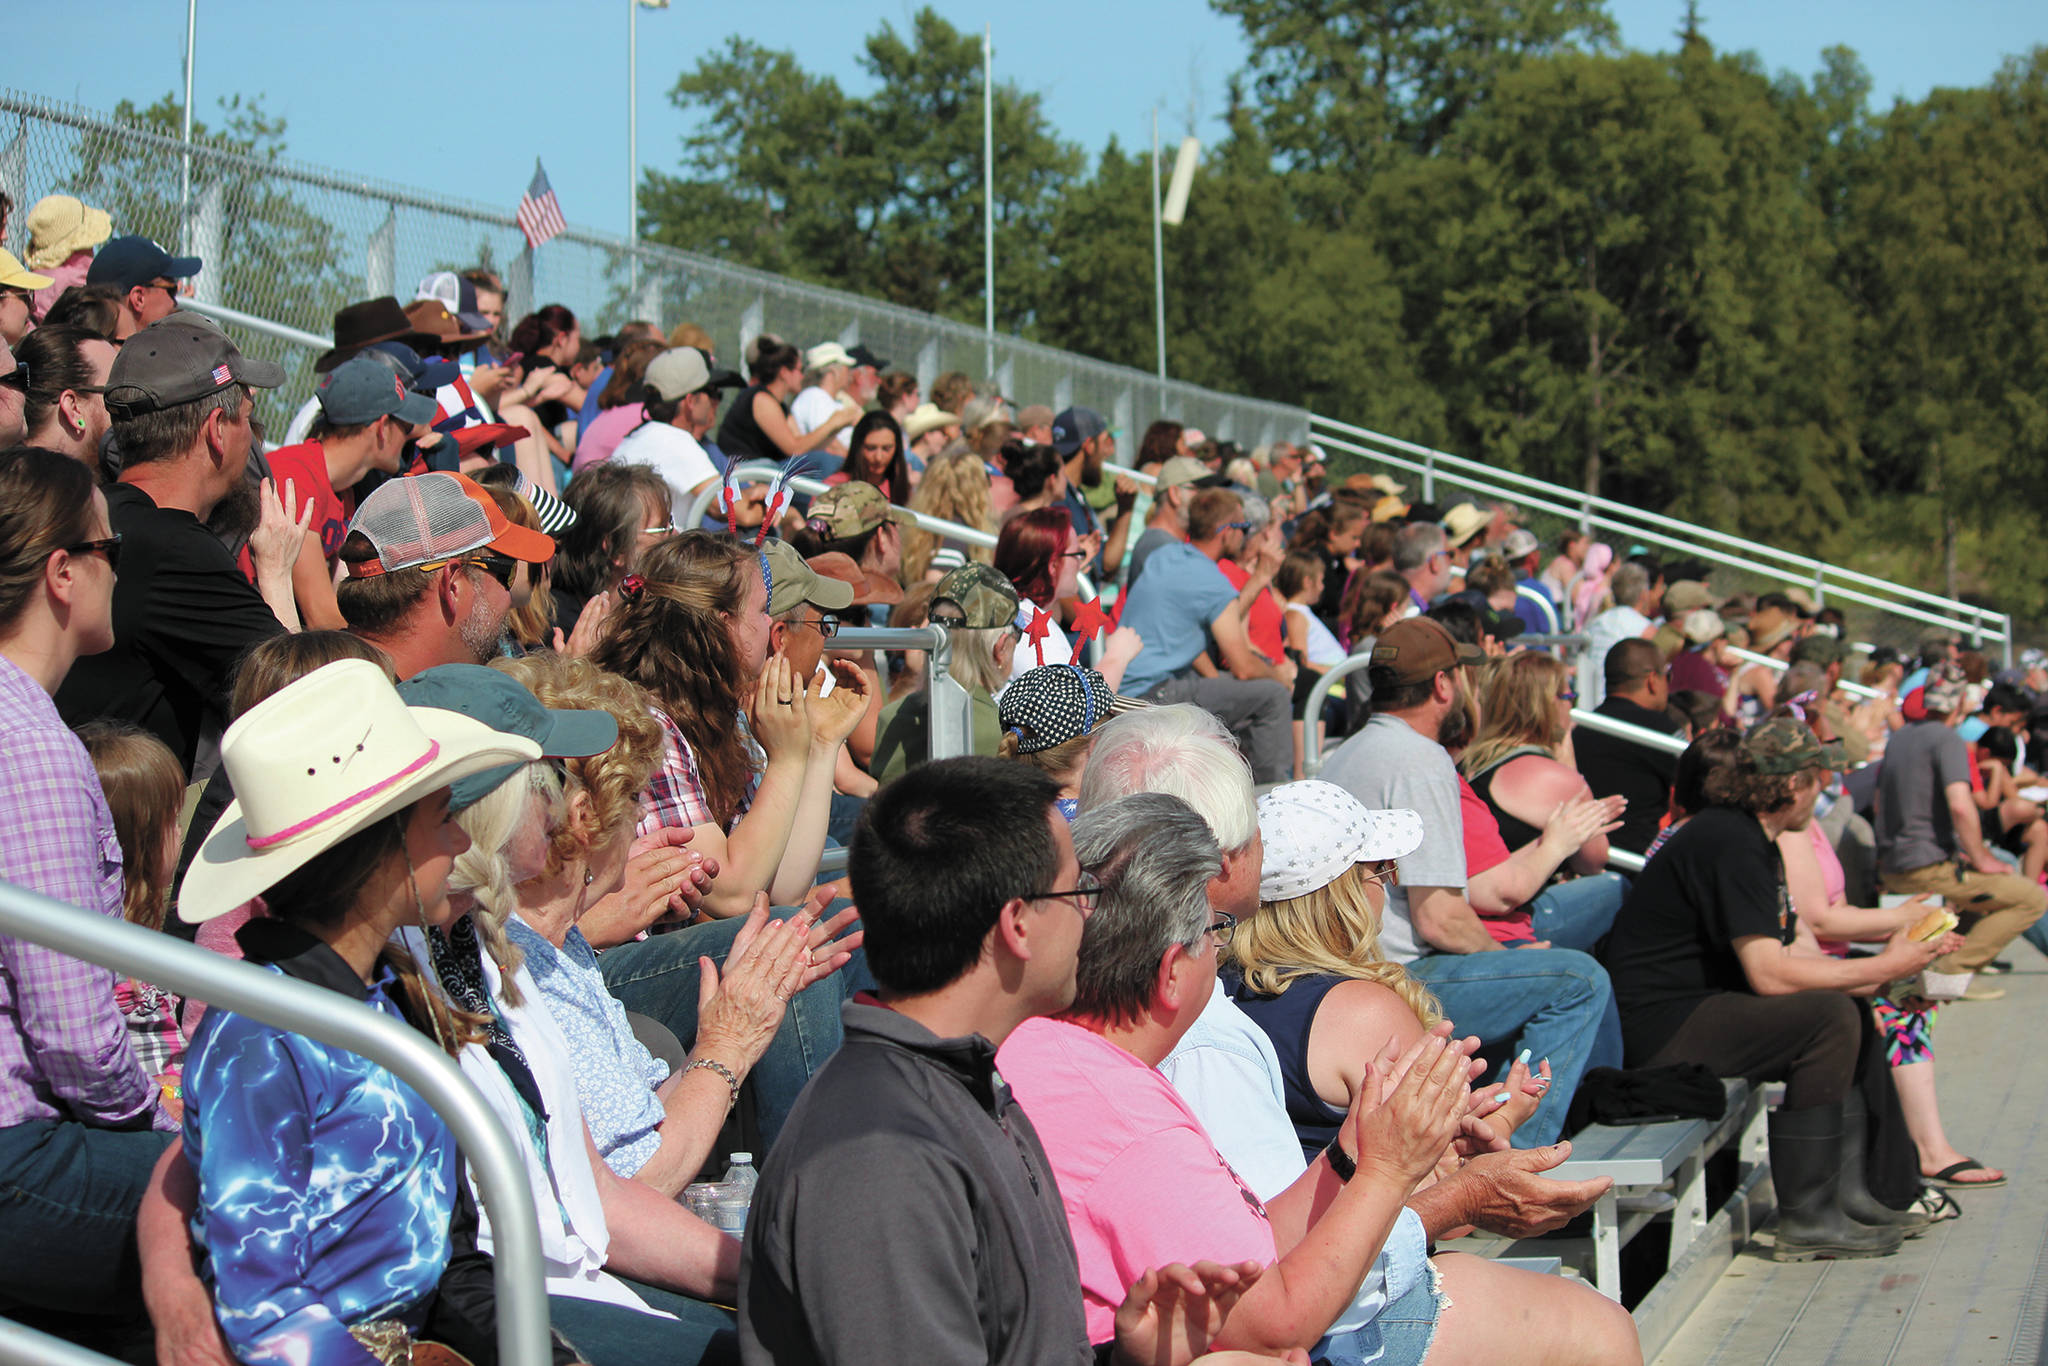 Members of the crowd at this year’s Ninilchik Rodeo cheer during an event Saturday, July 4, 2020 at the Kenai Peninsula Fairgrounds in Ninilchik, Alaska. The rodeo celebrated 60 years with a “rooted in history” theme. (Photo by Megan Pacer/Homer News)